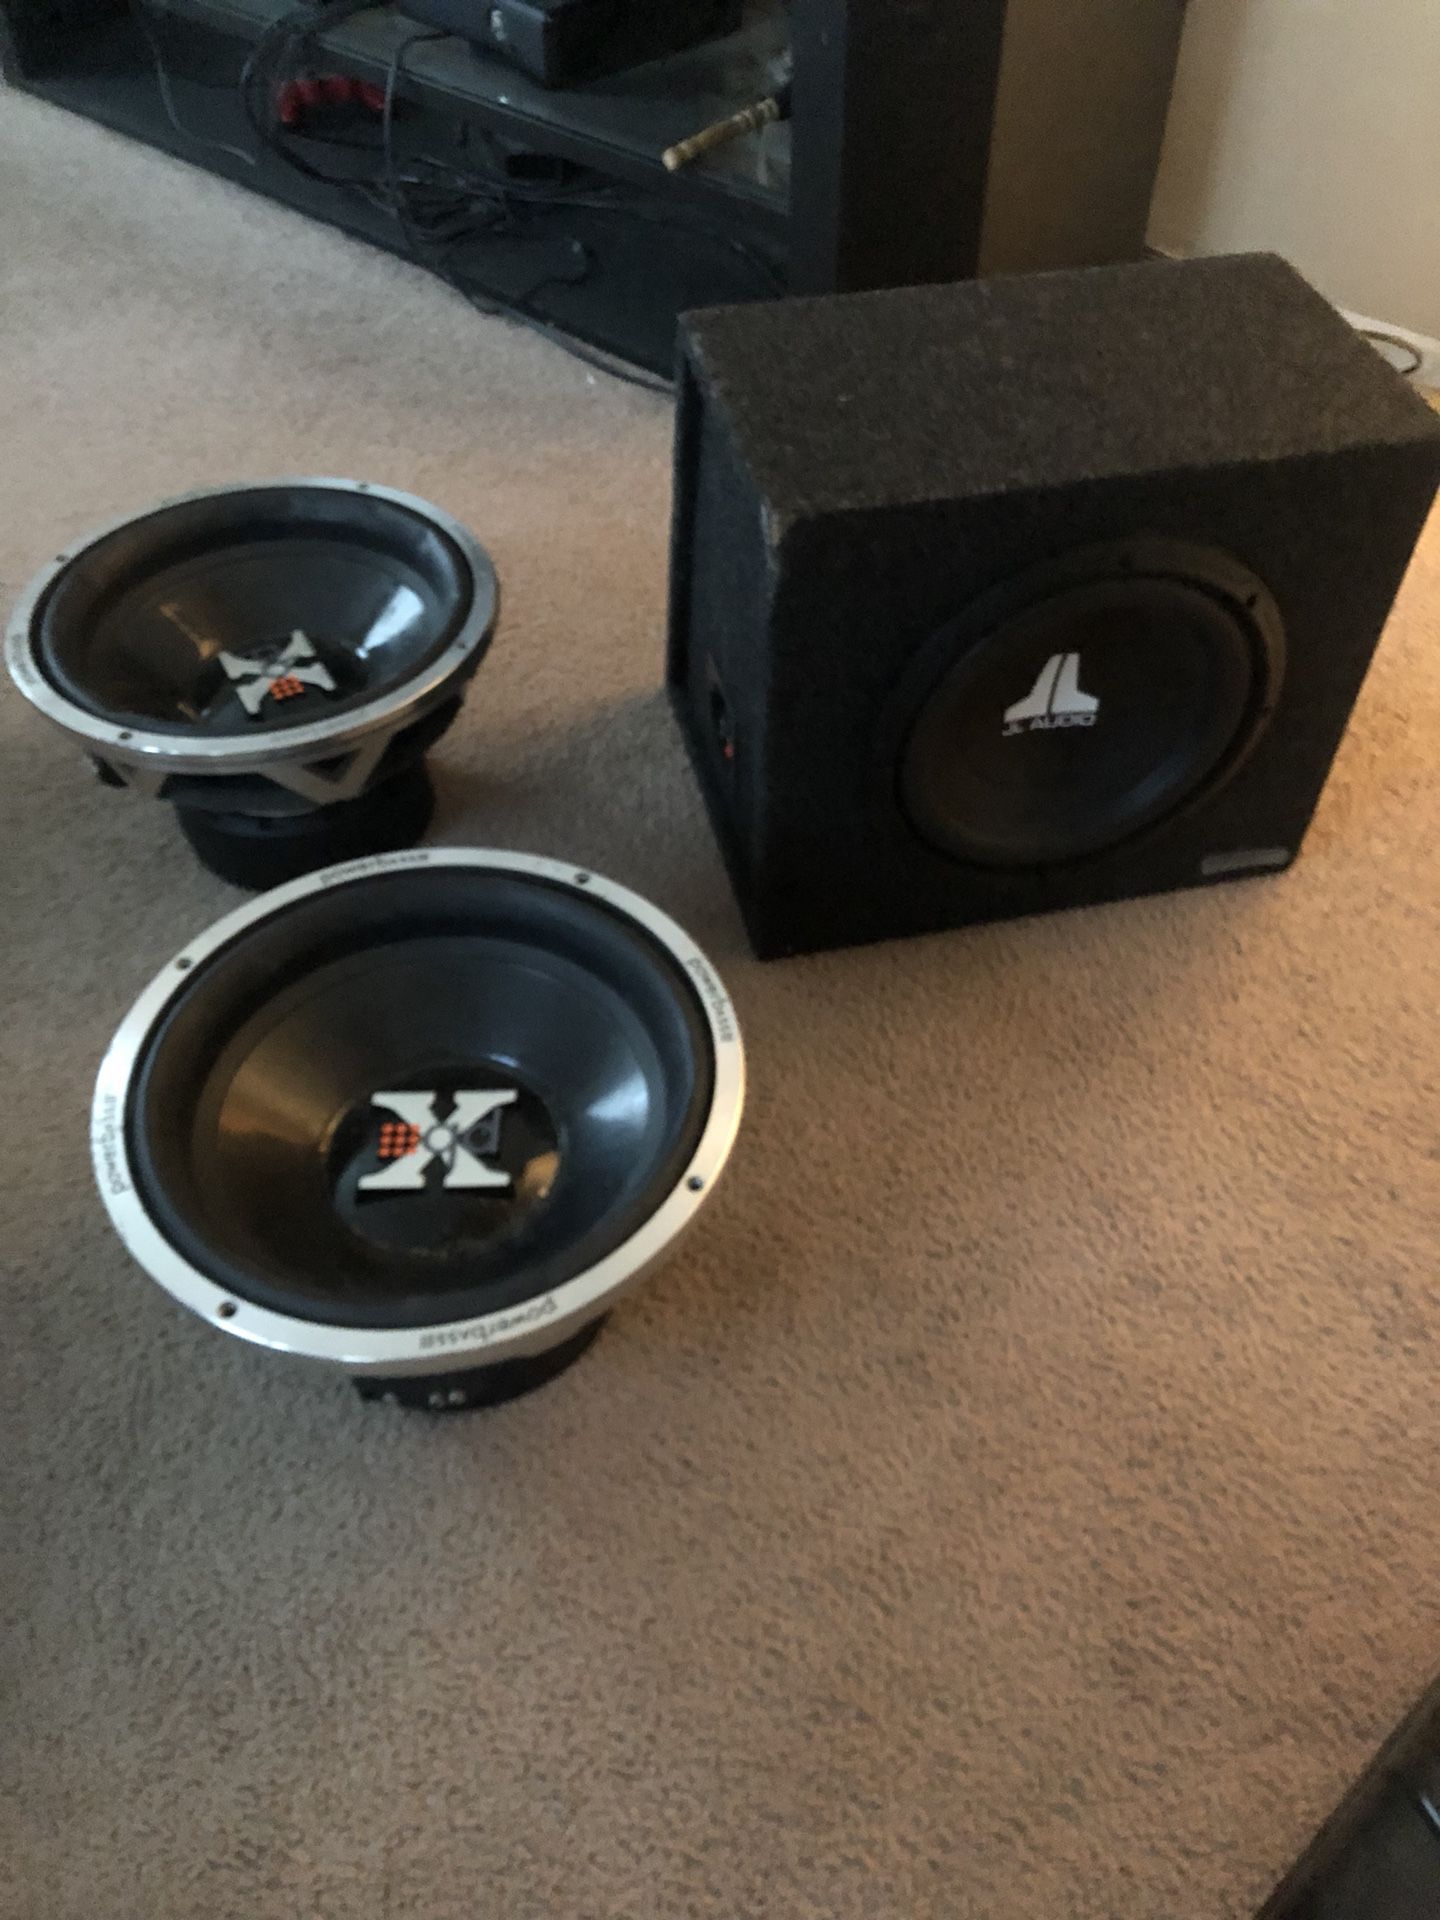 JL audio speaker 10s and powerbass 12s speakers all together